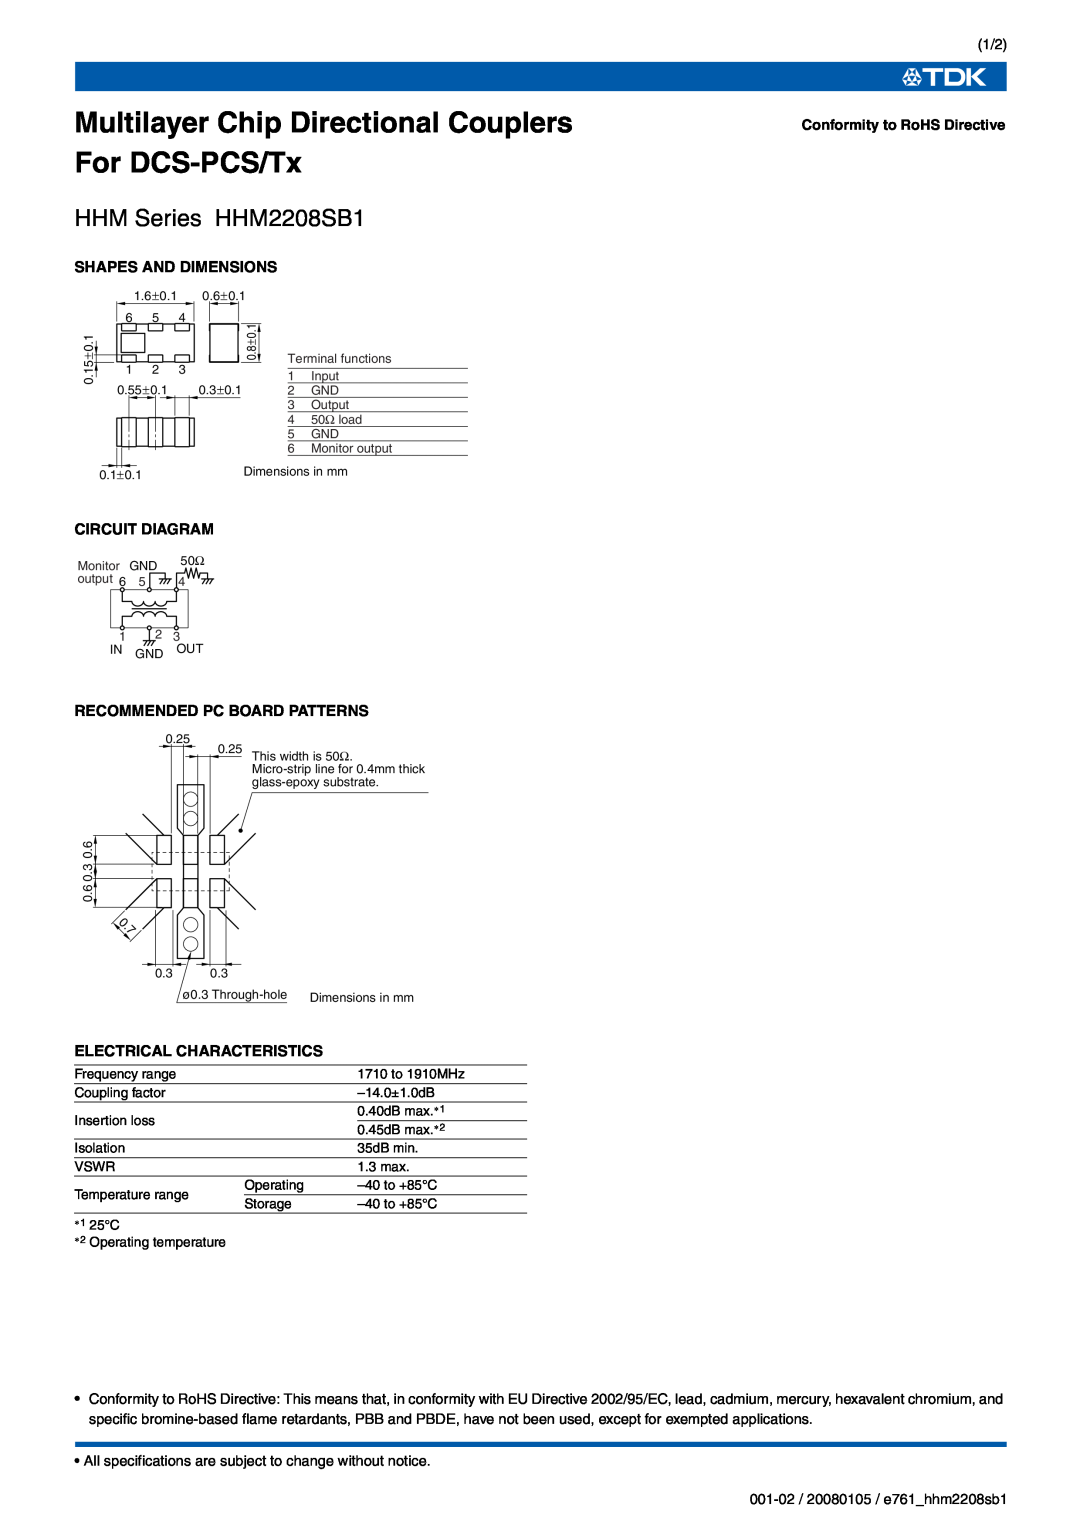 TDK HHM Series HHM2208SB1 specifications Shapes And Dimensions, Conformity to RoHS Directive, Circuit Diagram 